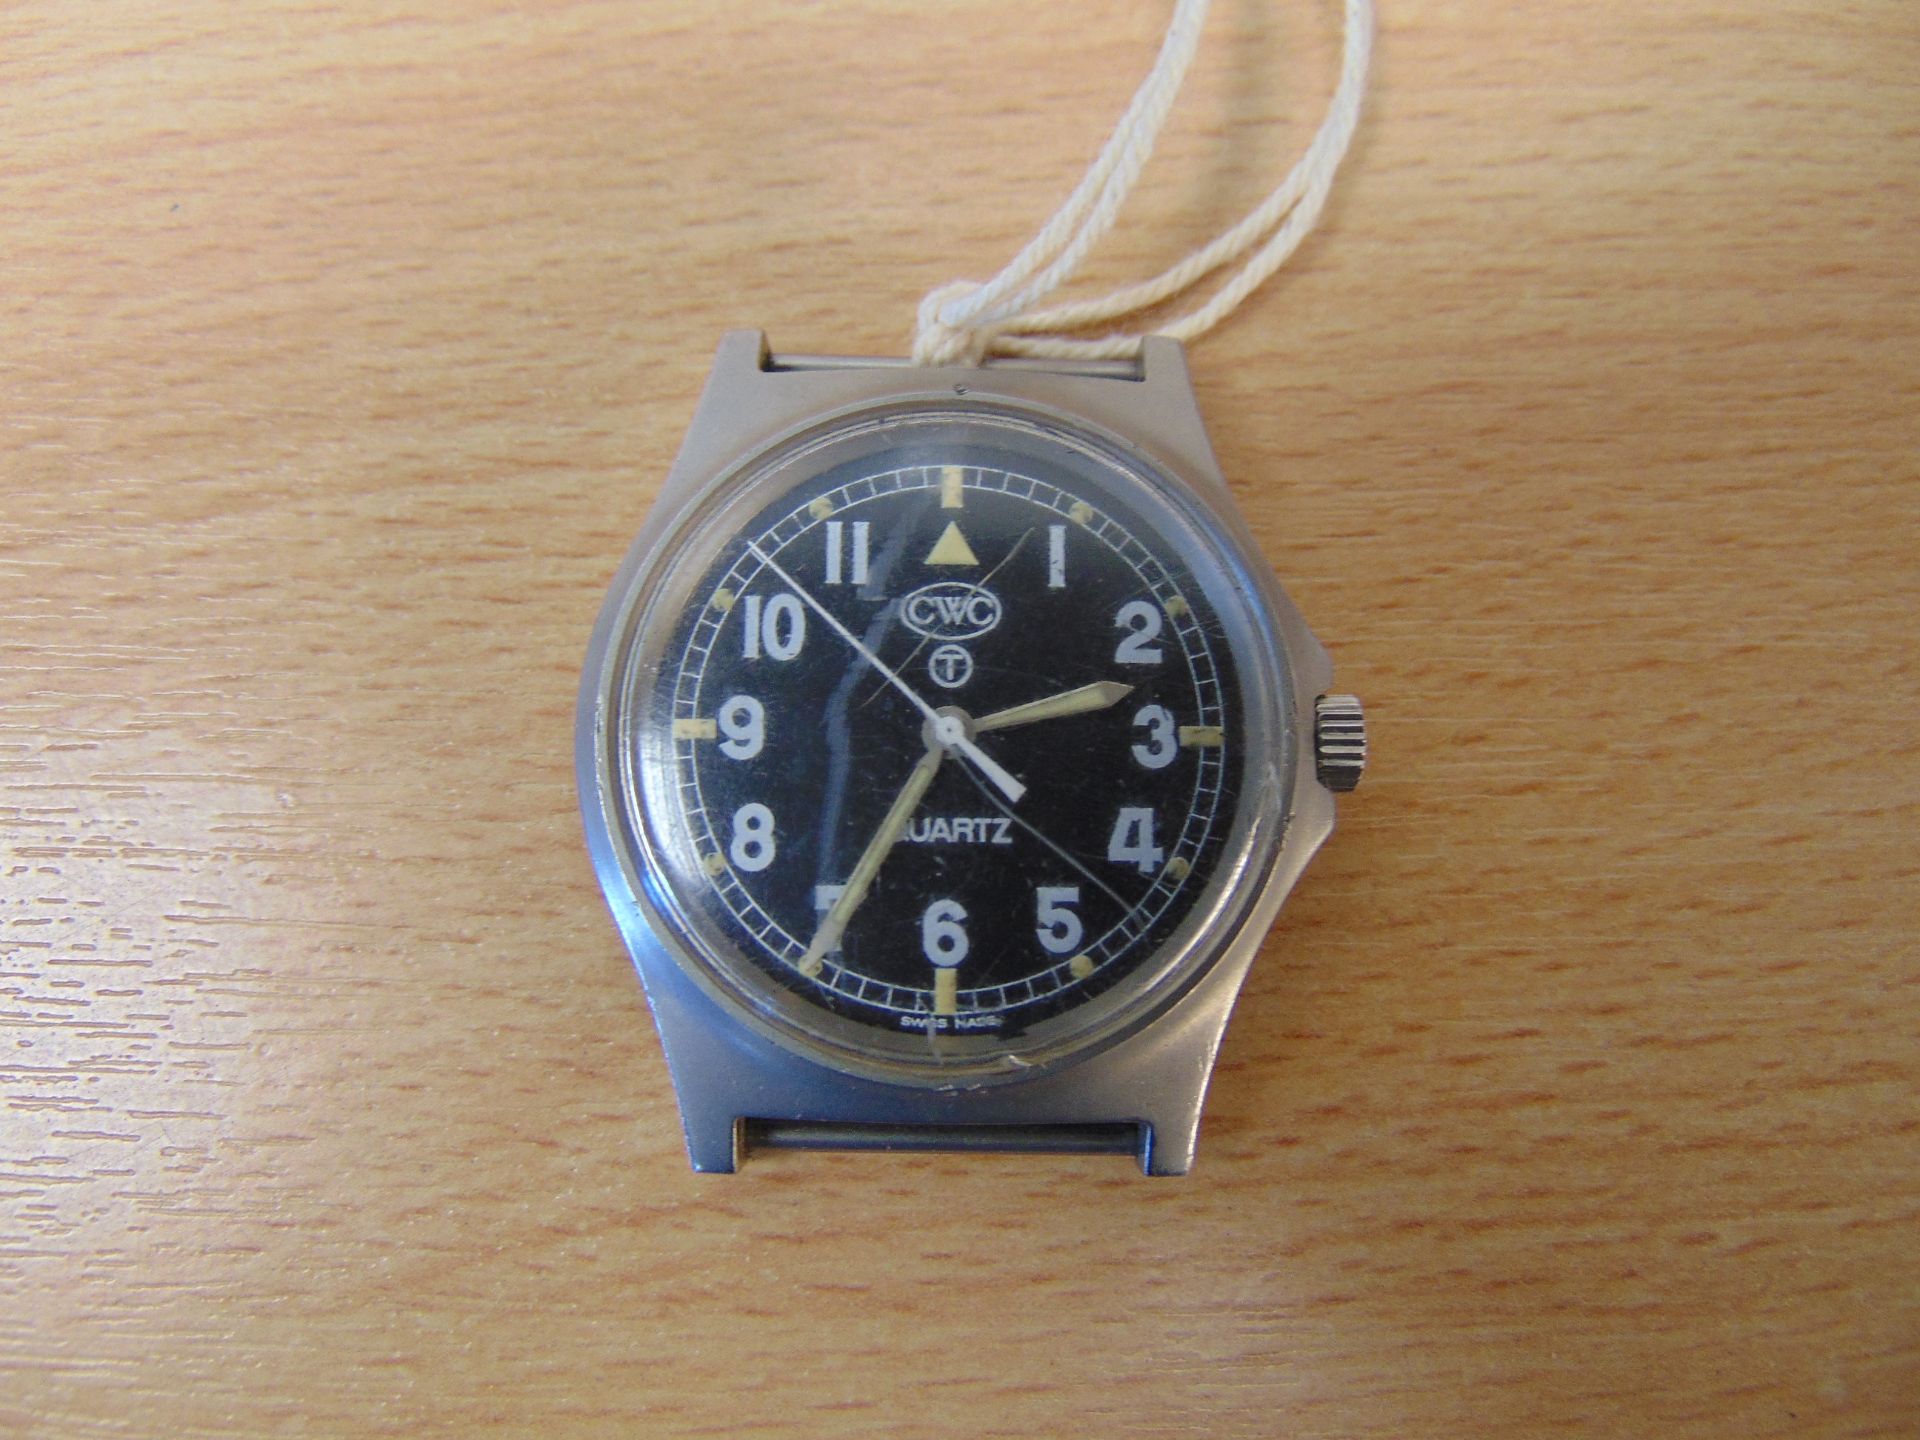 CWC W10 British Army service watch Nato Marks, Date 1998 - Image 2 of 4